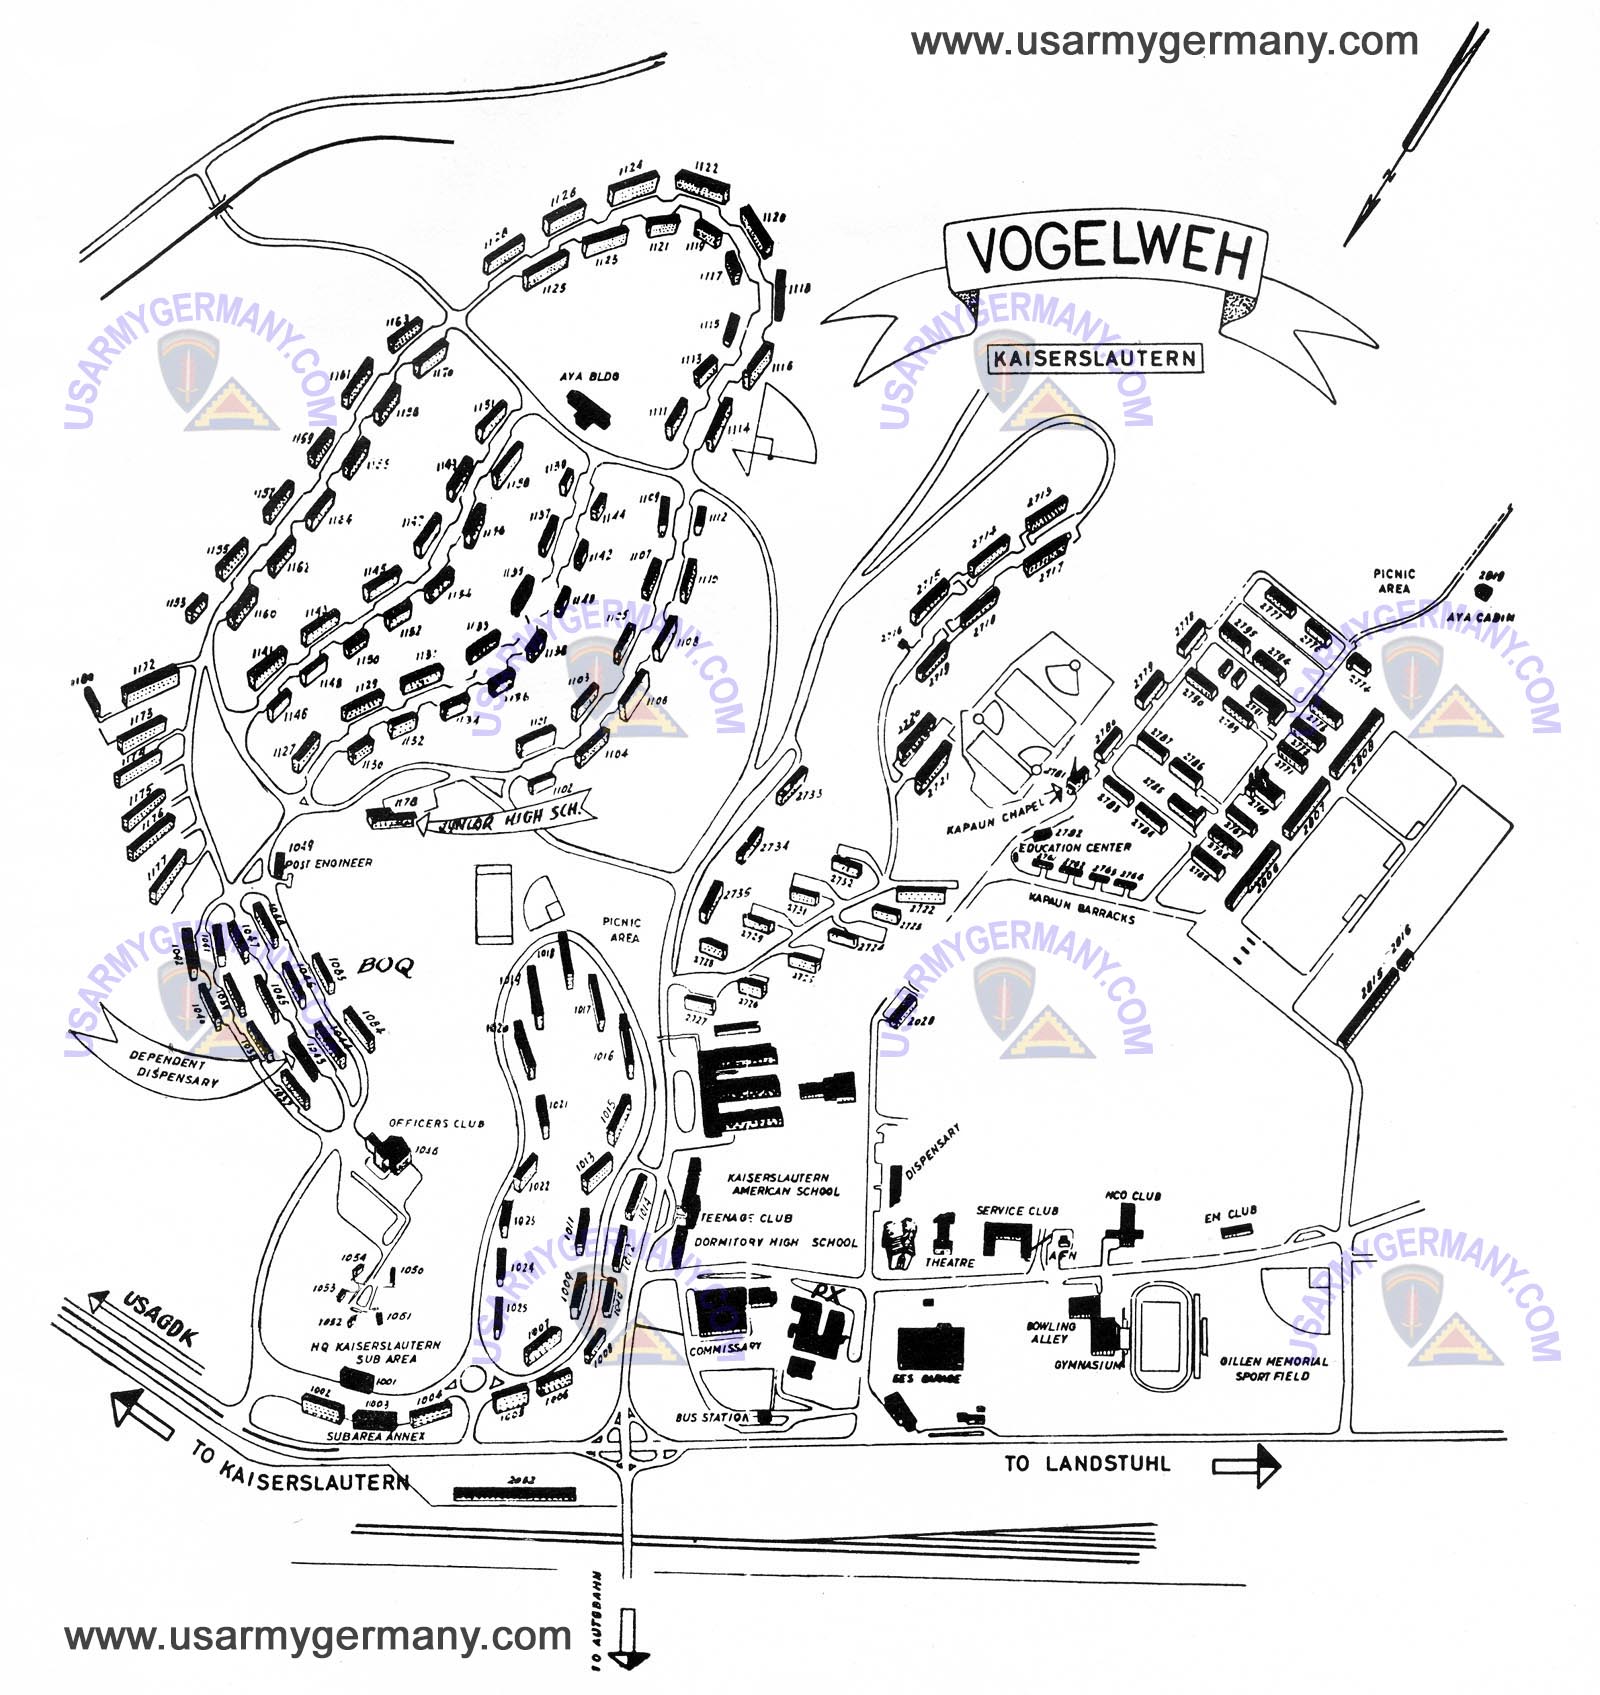 Vogelweh area  map